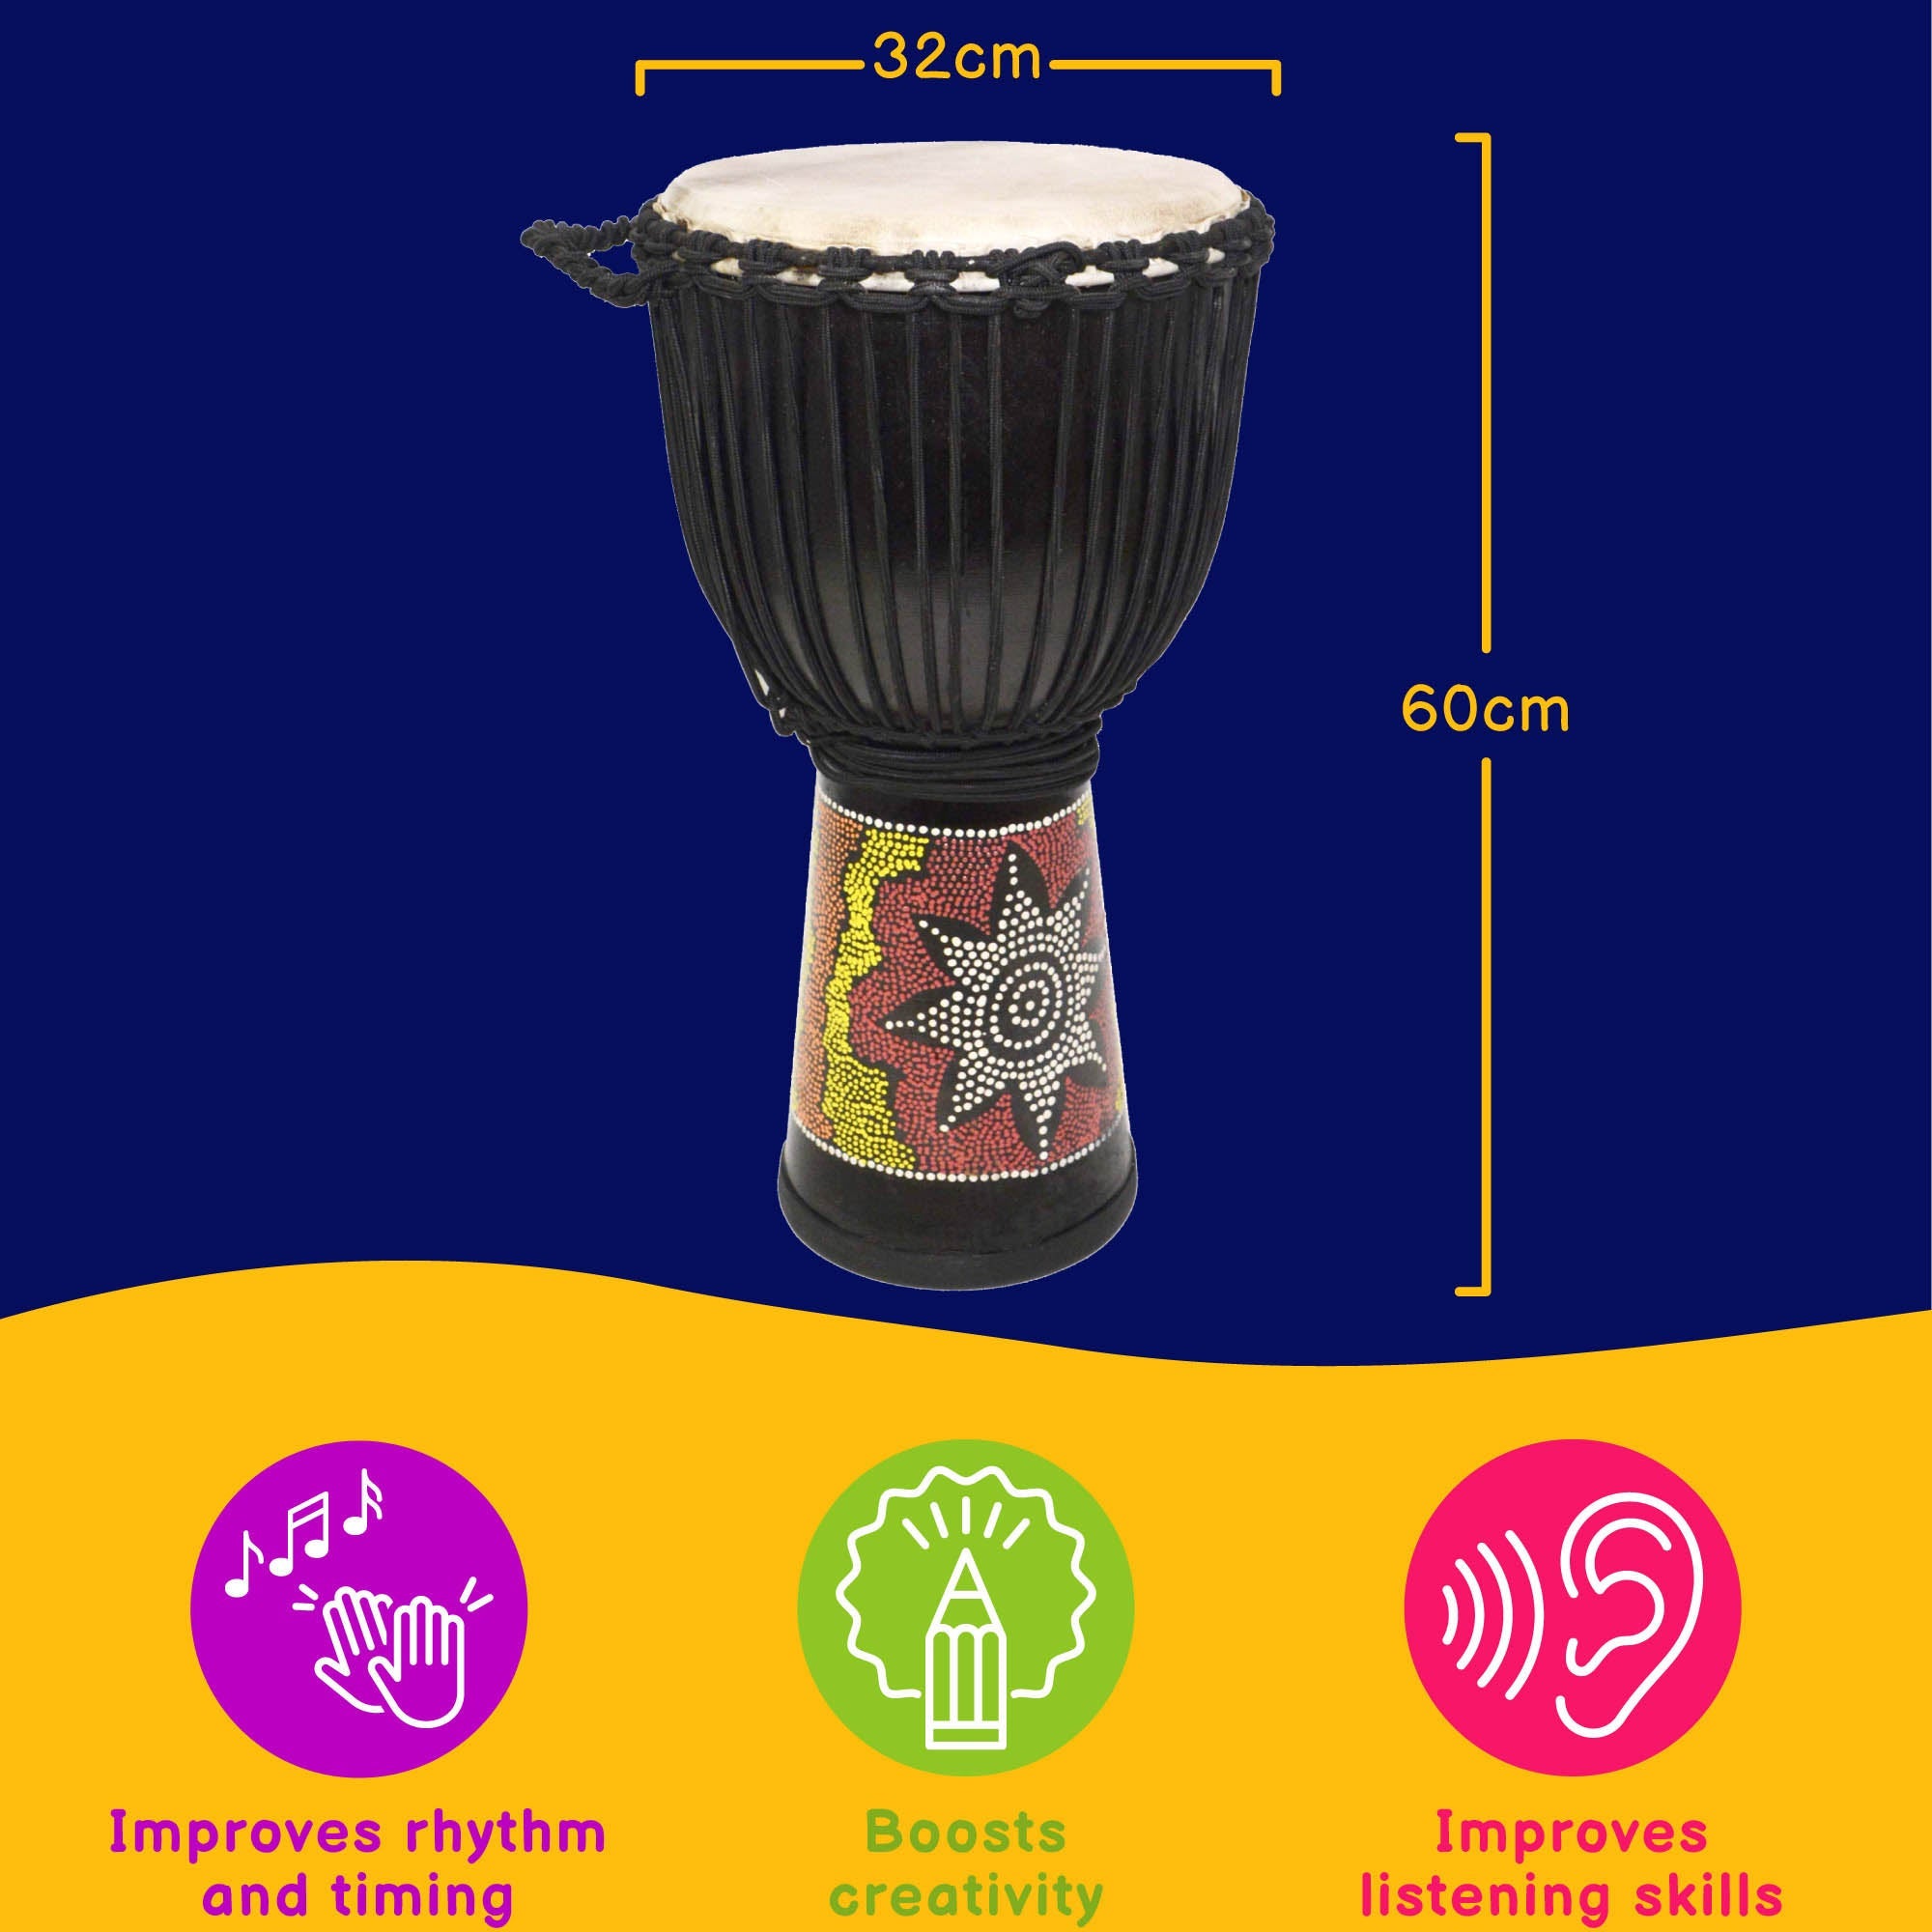 A-Star Painted Djembe - 12 Inch